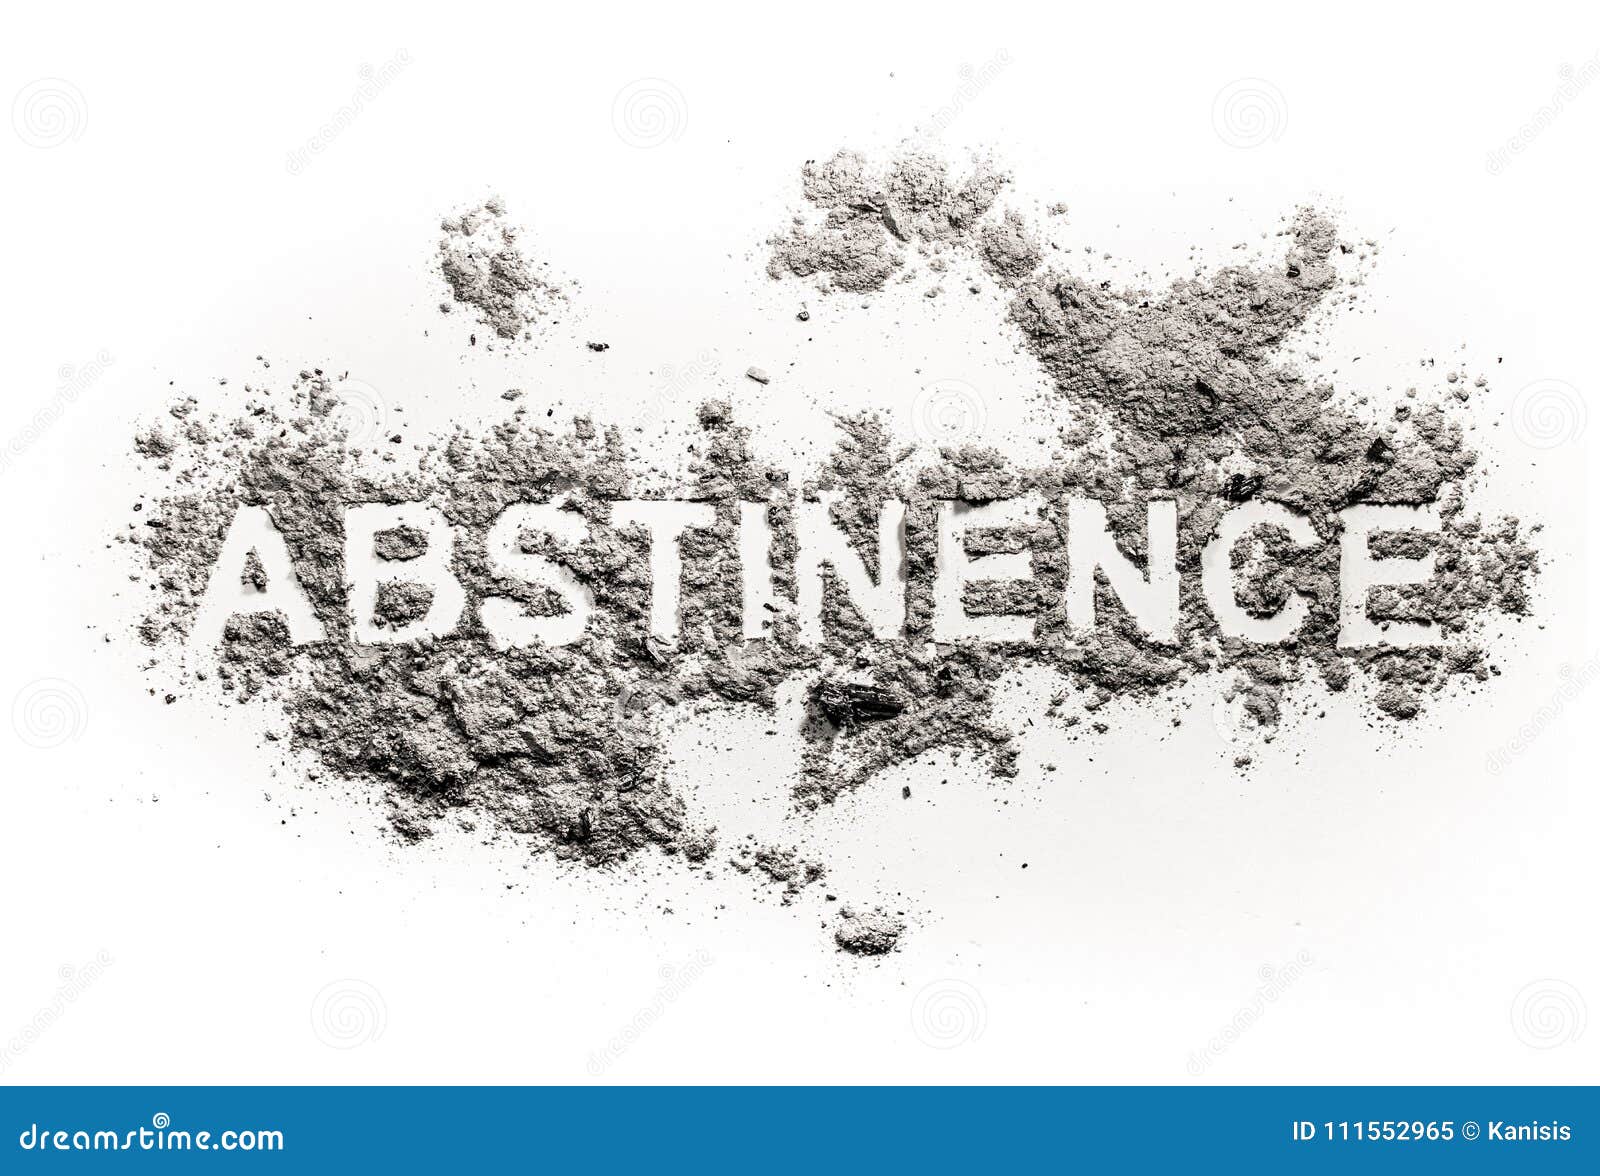 abstinence word written in ash, sand or dust